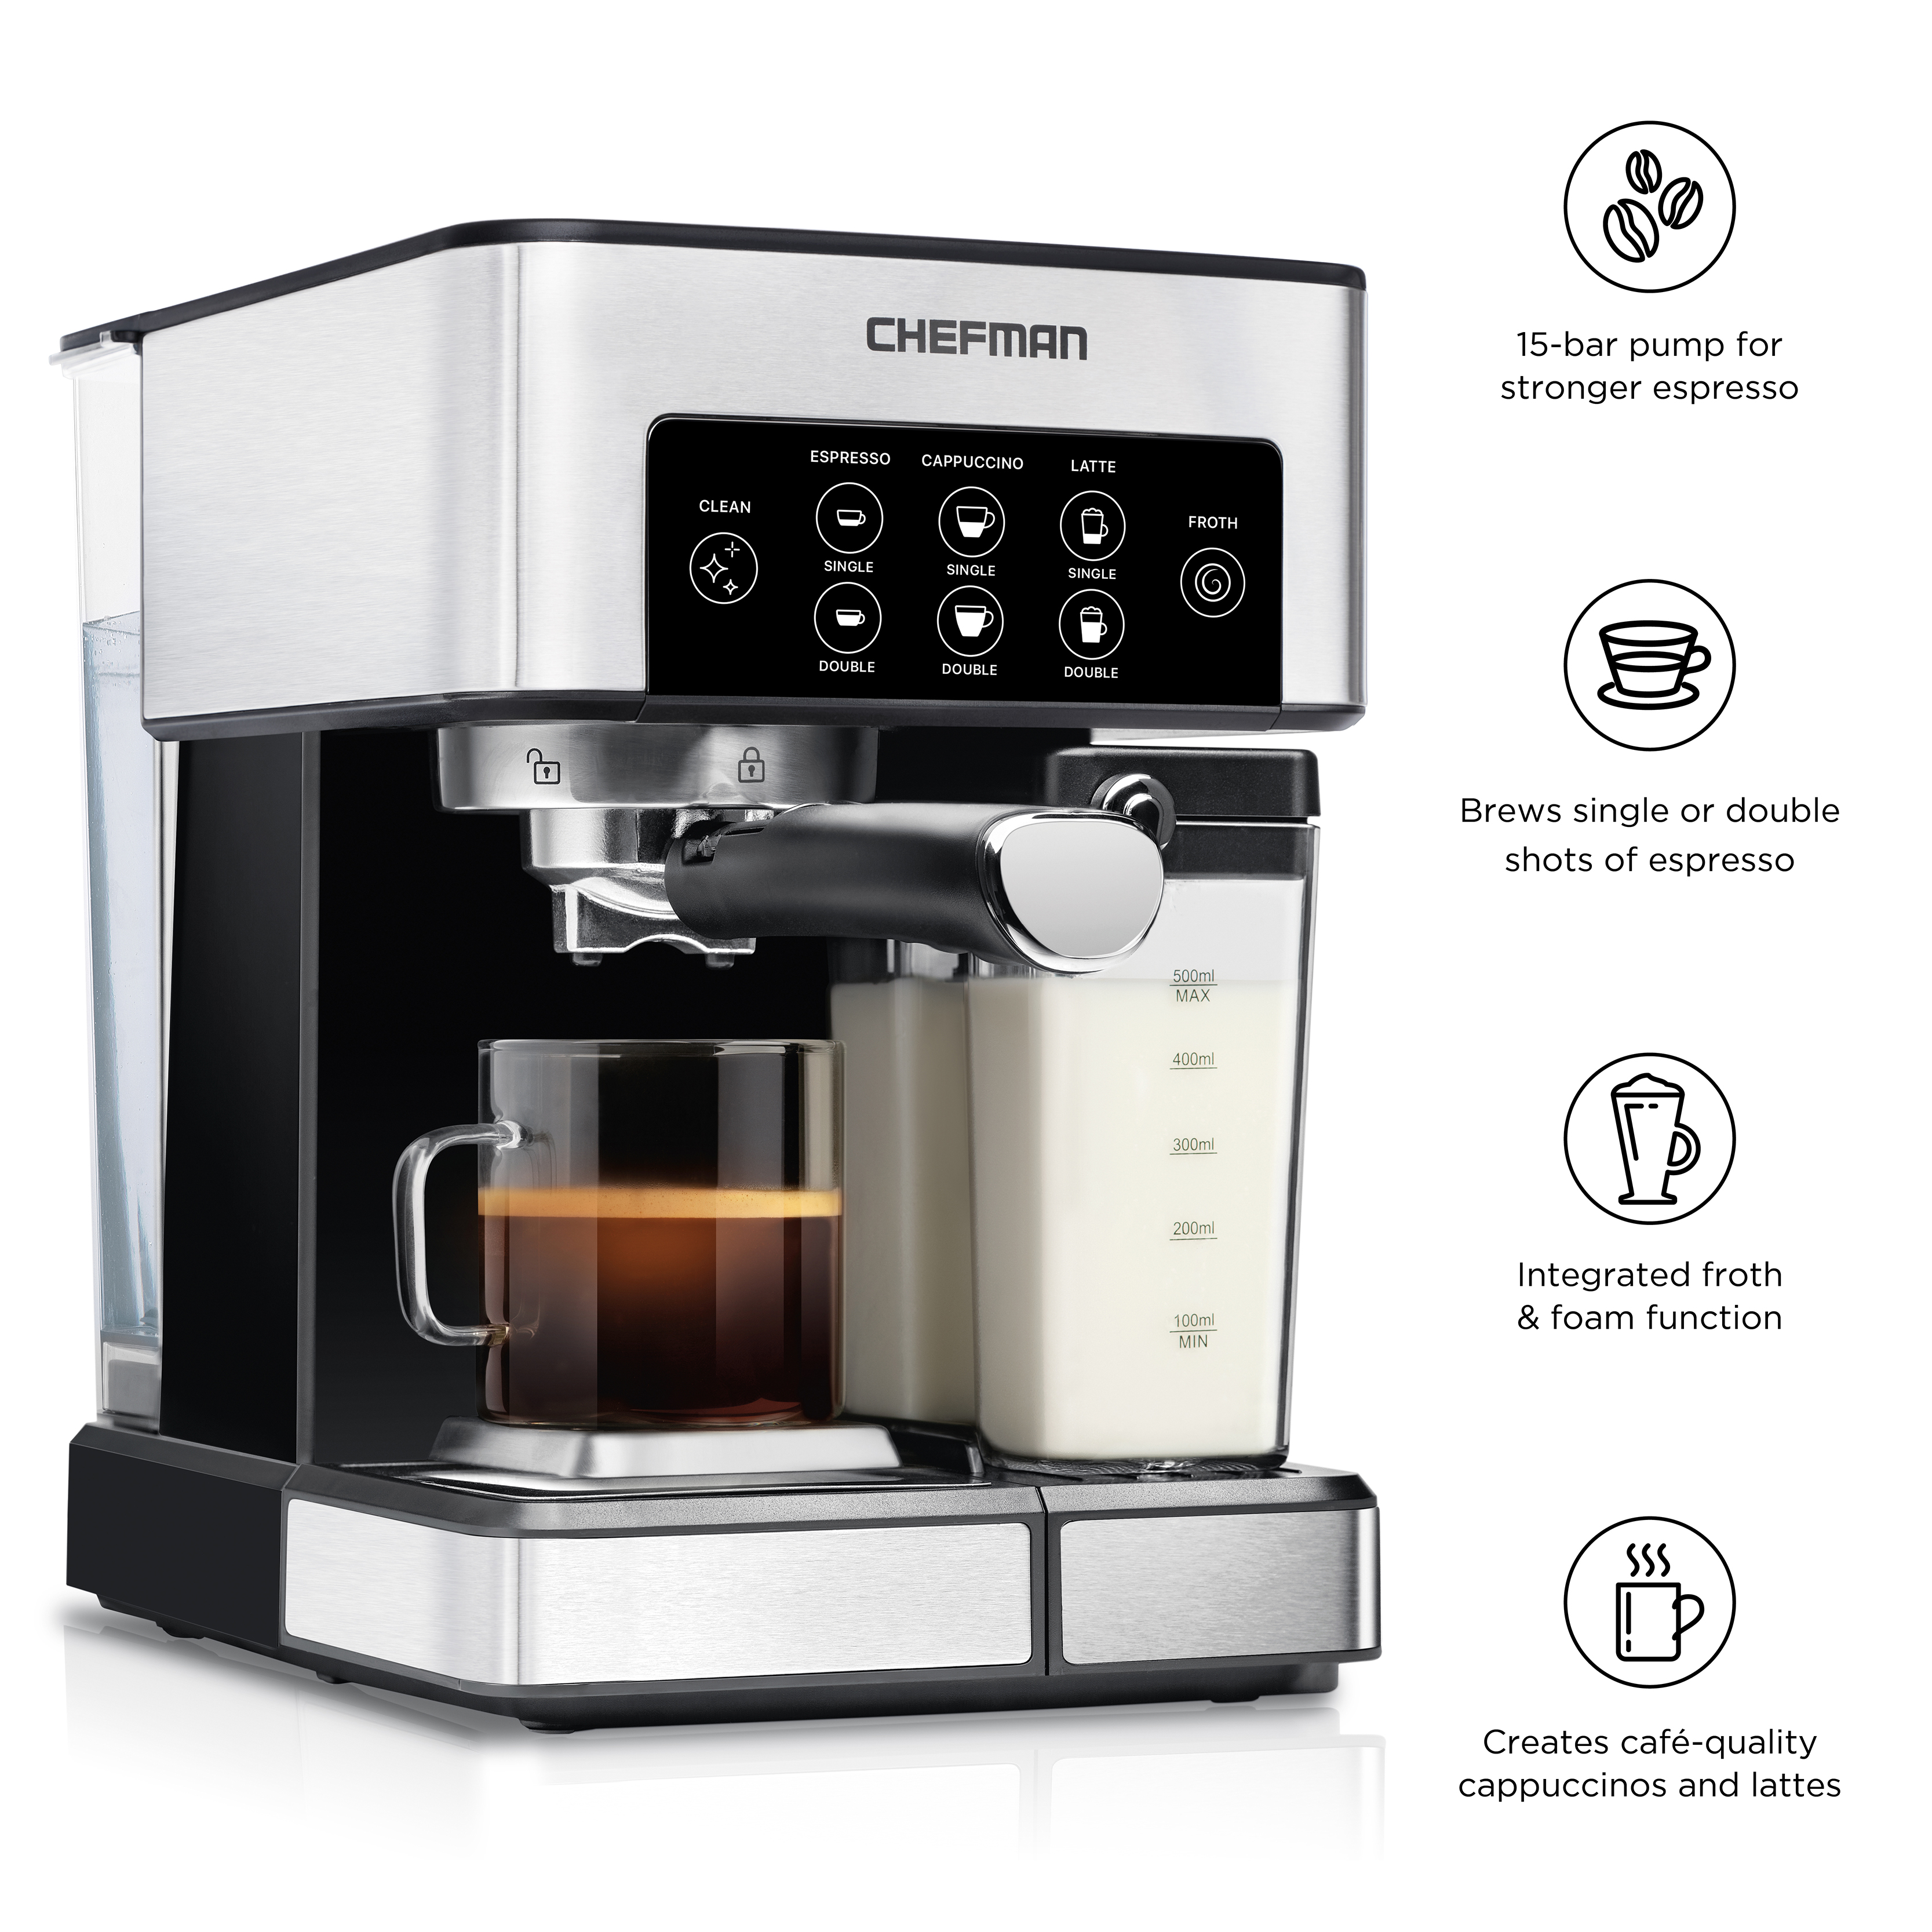 Chefman Barista Pro 6-in-1 Espresso Machine with Milk Frother, 15-BAR Pump, 1.8L Water Reservoir, Stainless Steel - image 3 of 9